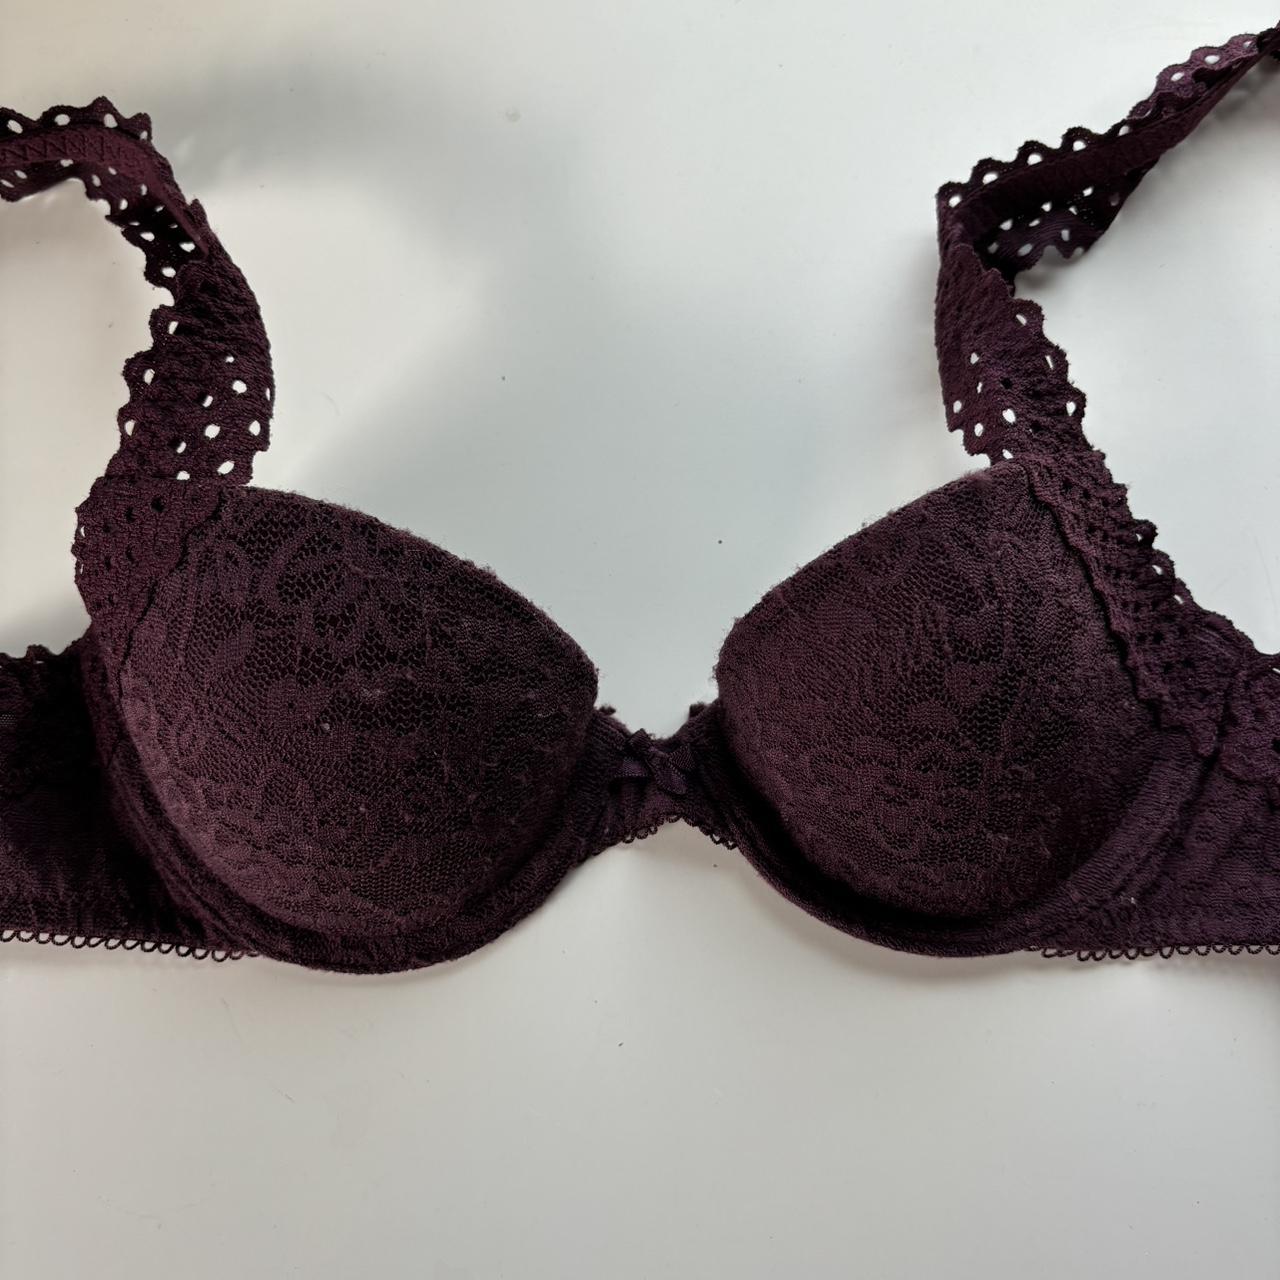 Rosie bra from Playful Promises Quarter-cup Great - Depop